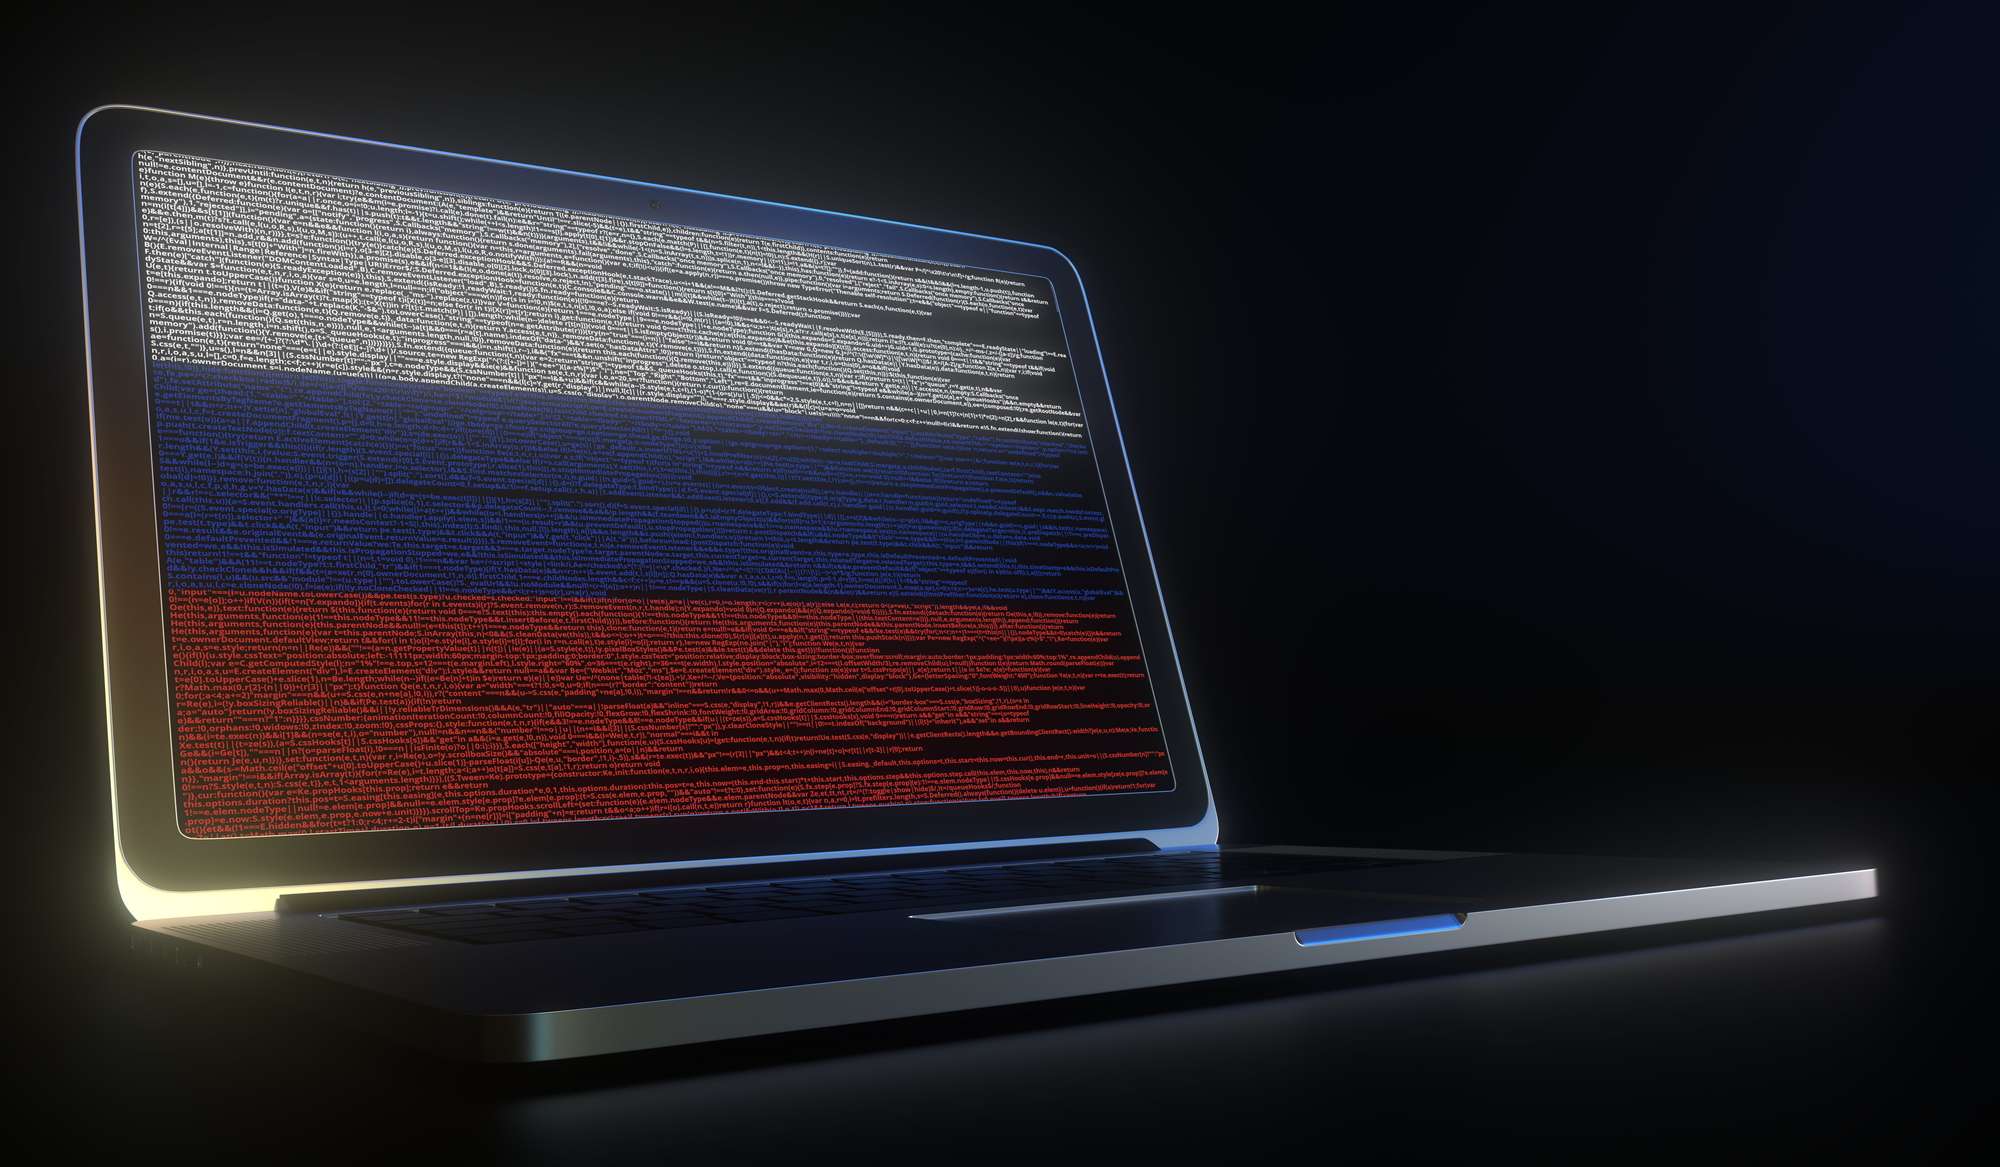 Russian flag on computer screen as attack